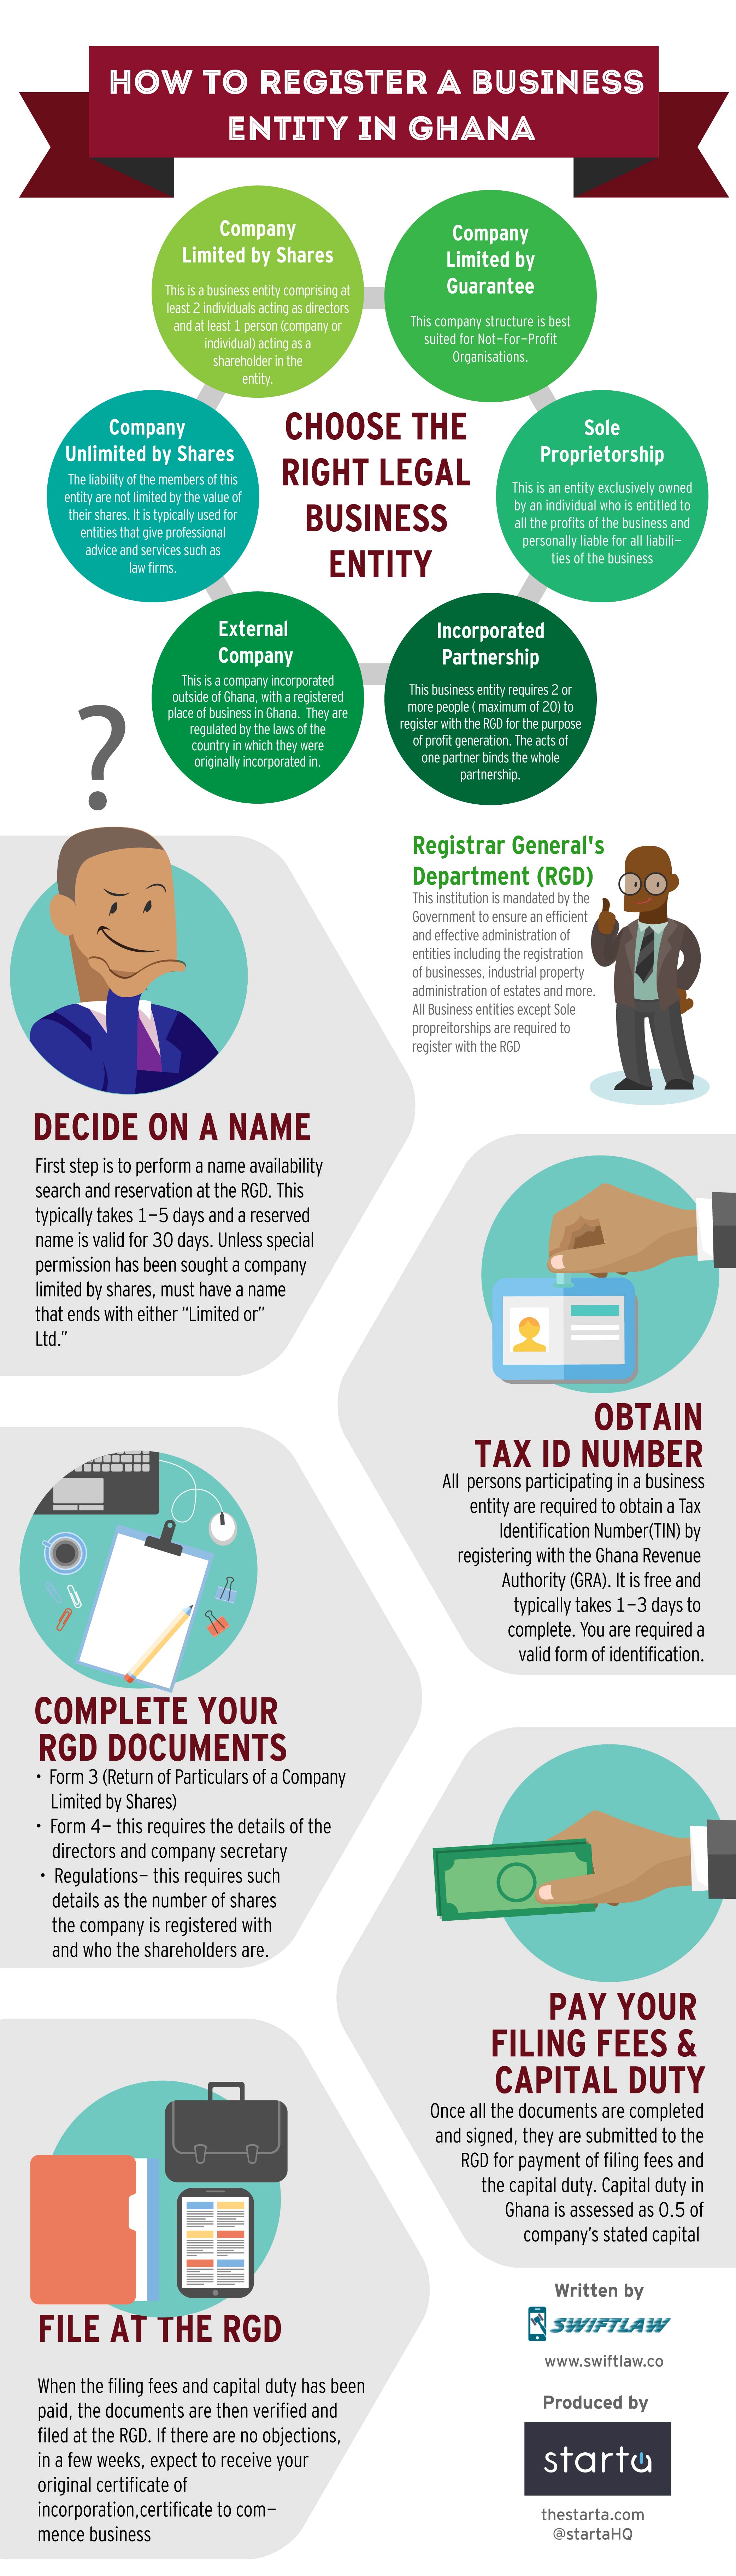 How to Register a Business Entity in Ghana [infographic]